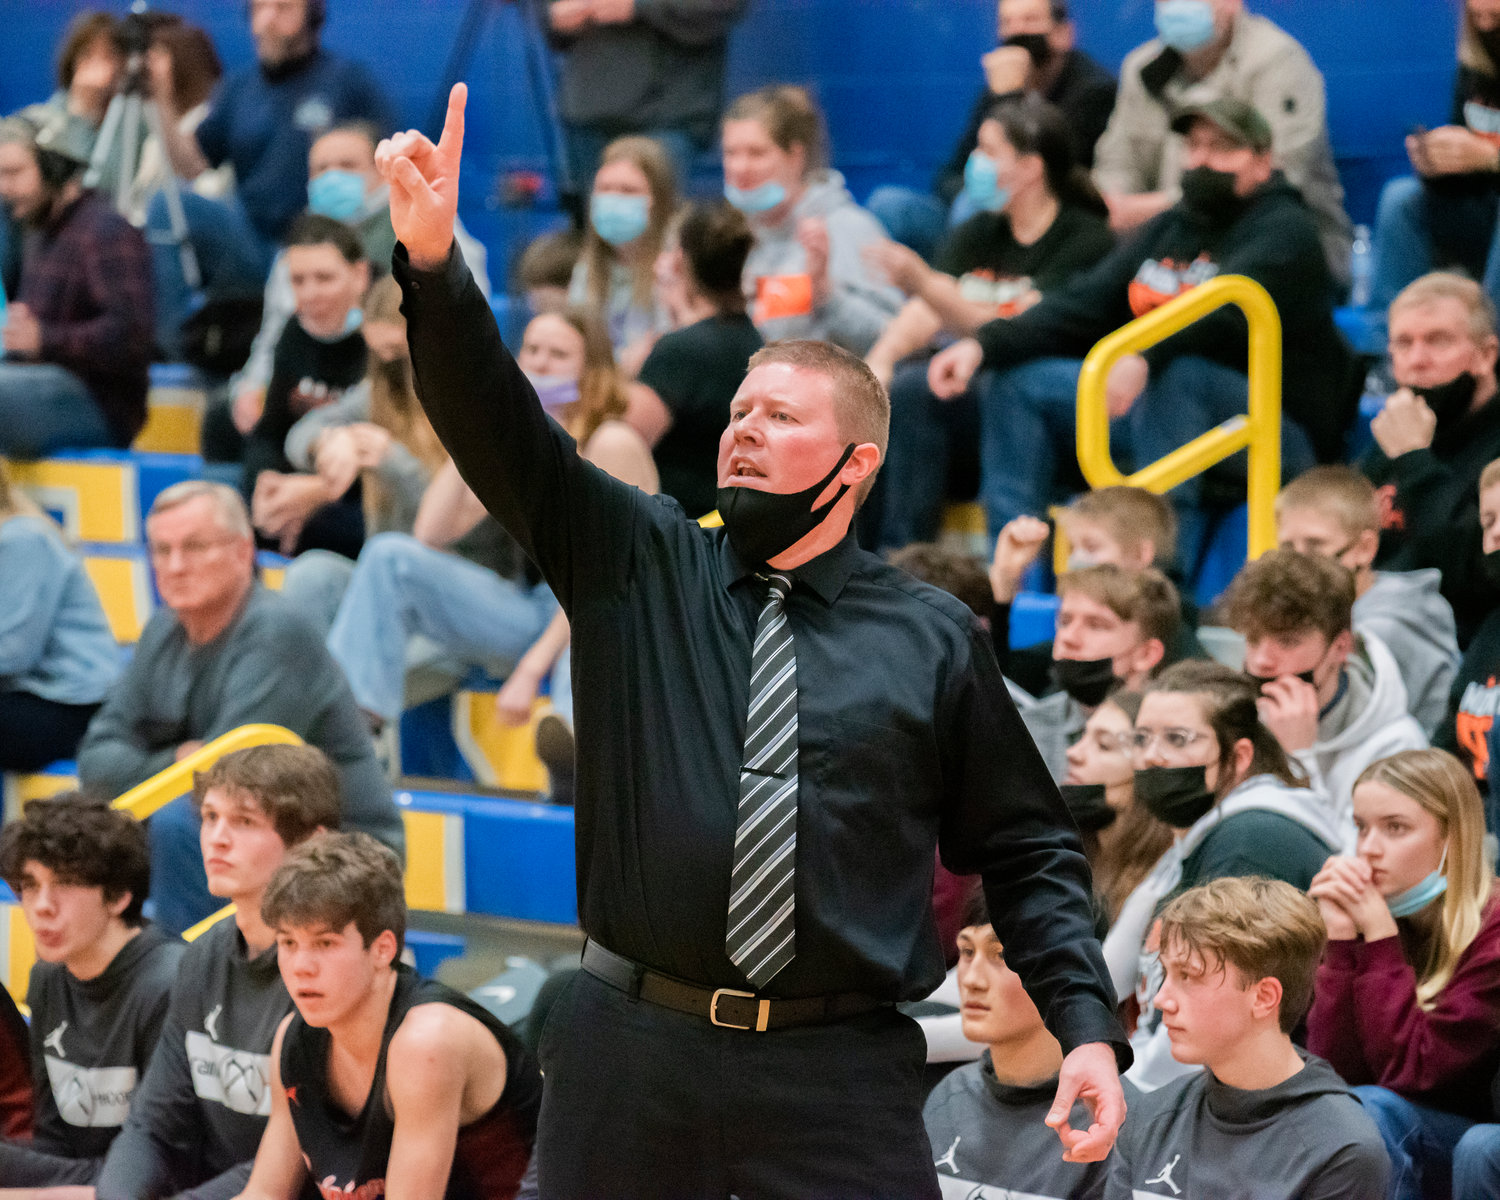 Rainier Head Coach Ben Scheaffer yells to players on the court during a game Friday night.